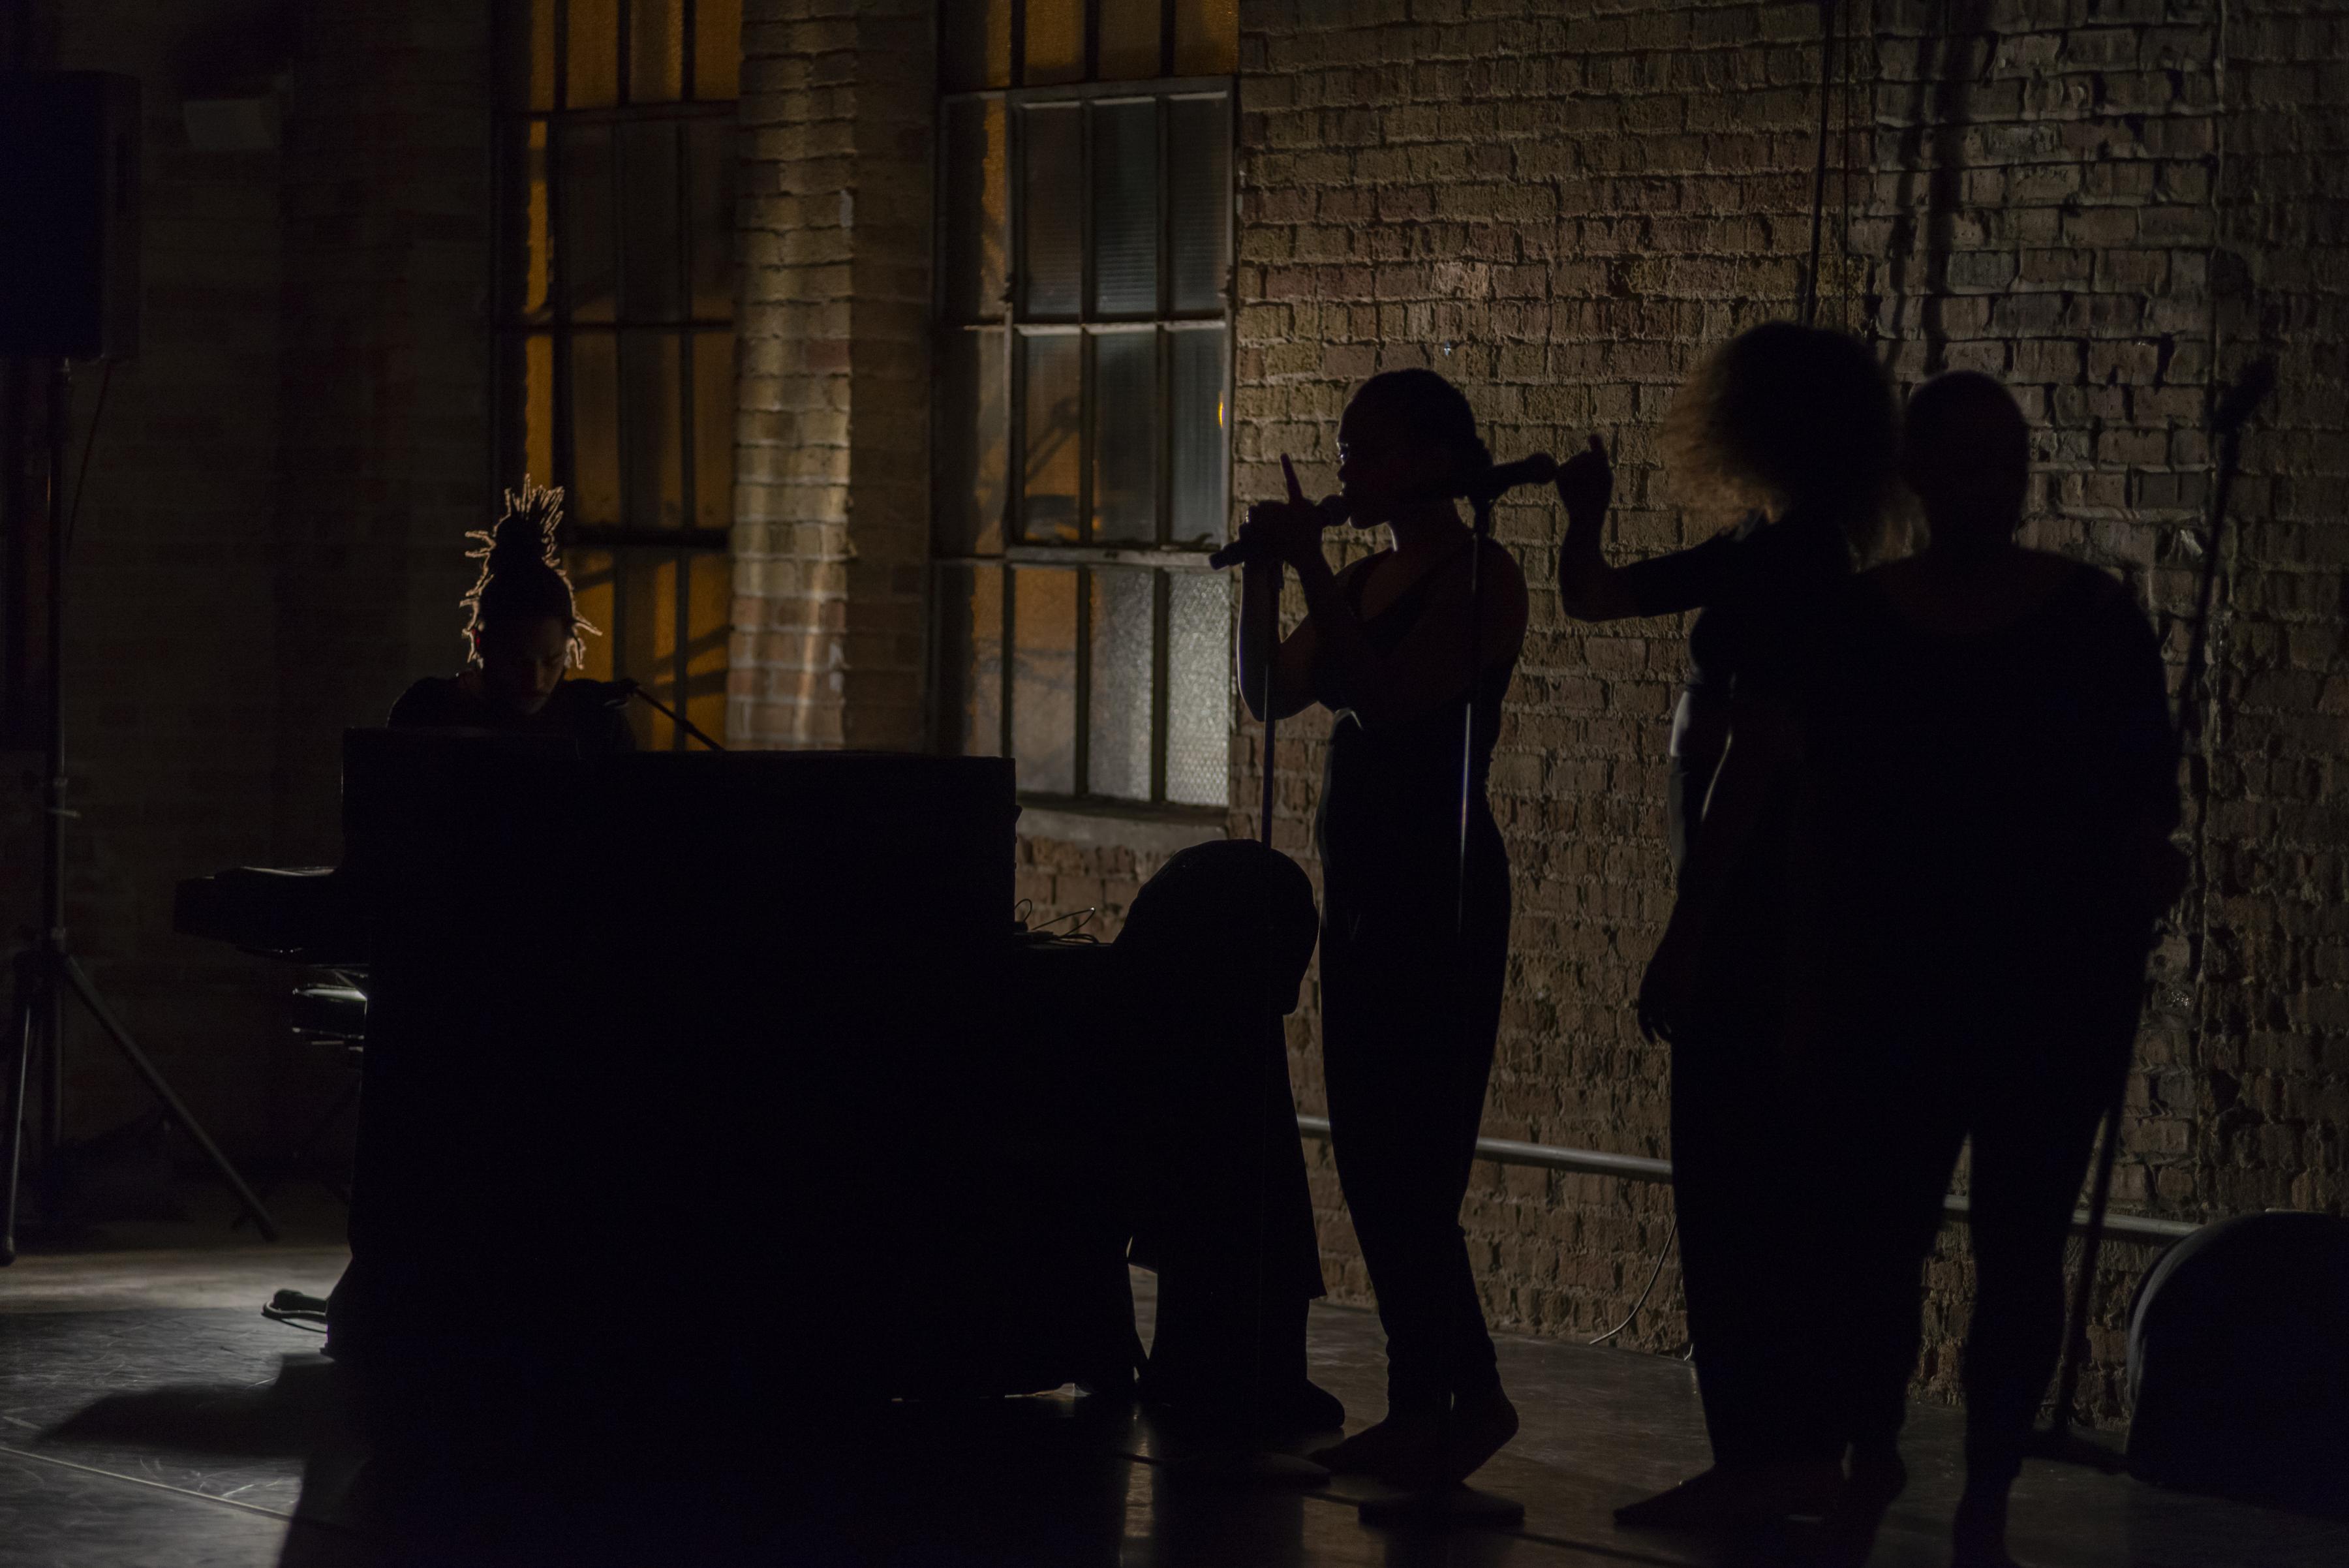 A group of performers are silhouetted against a brown brick wall.